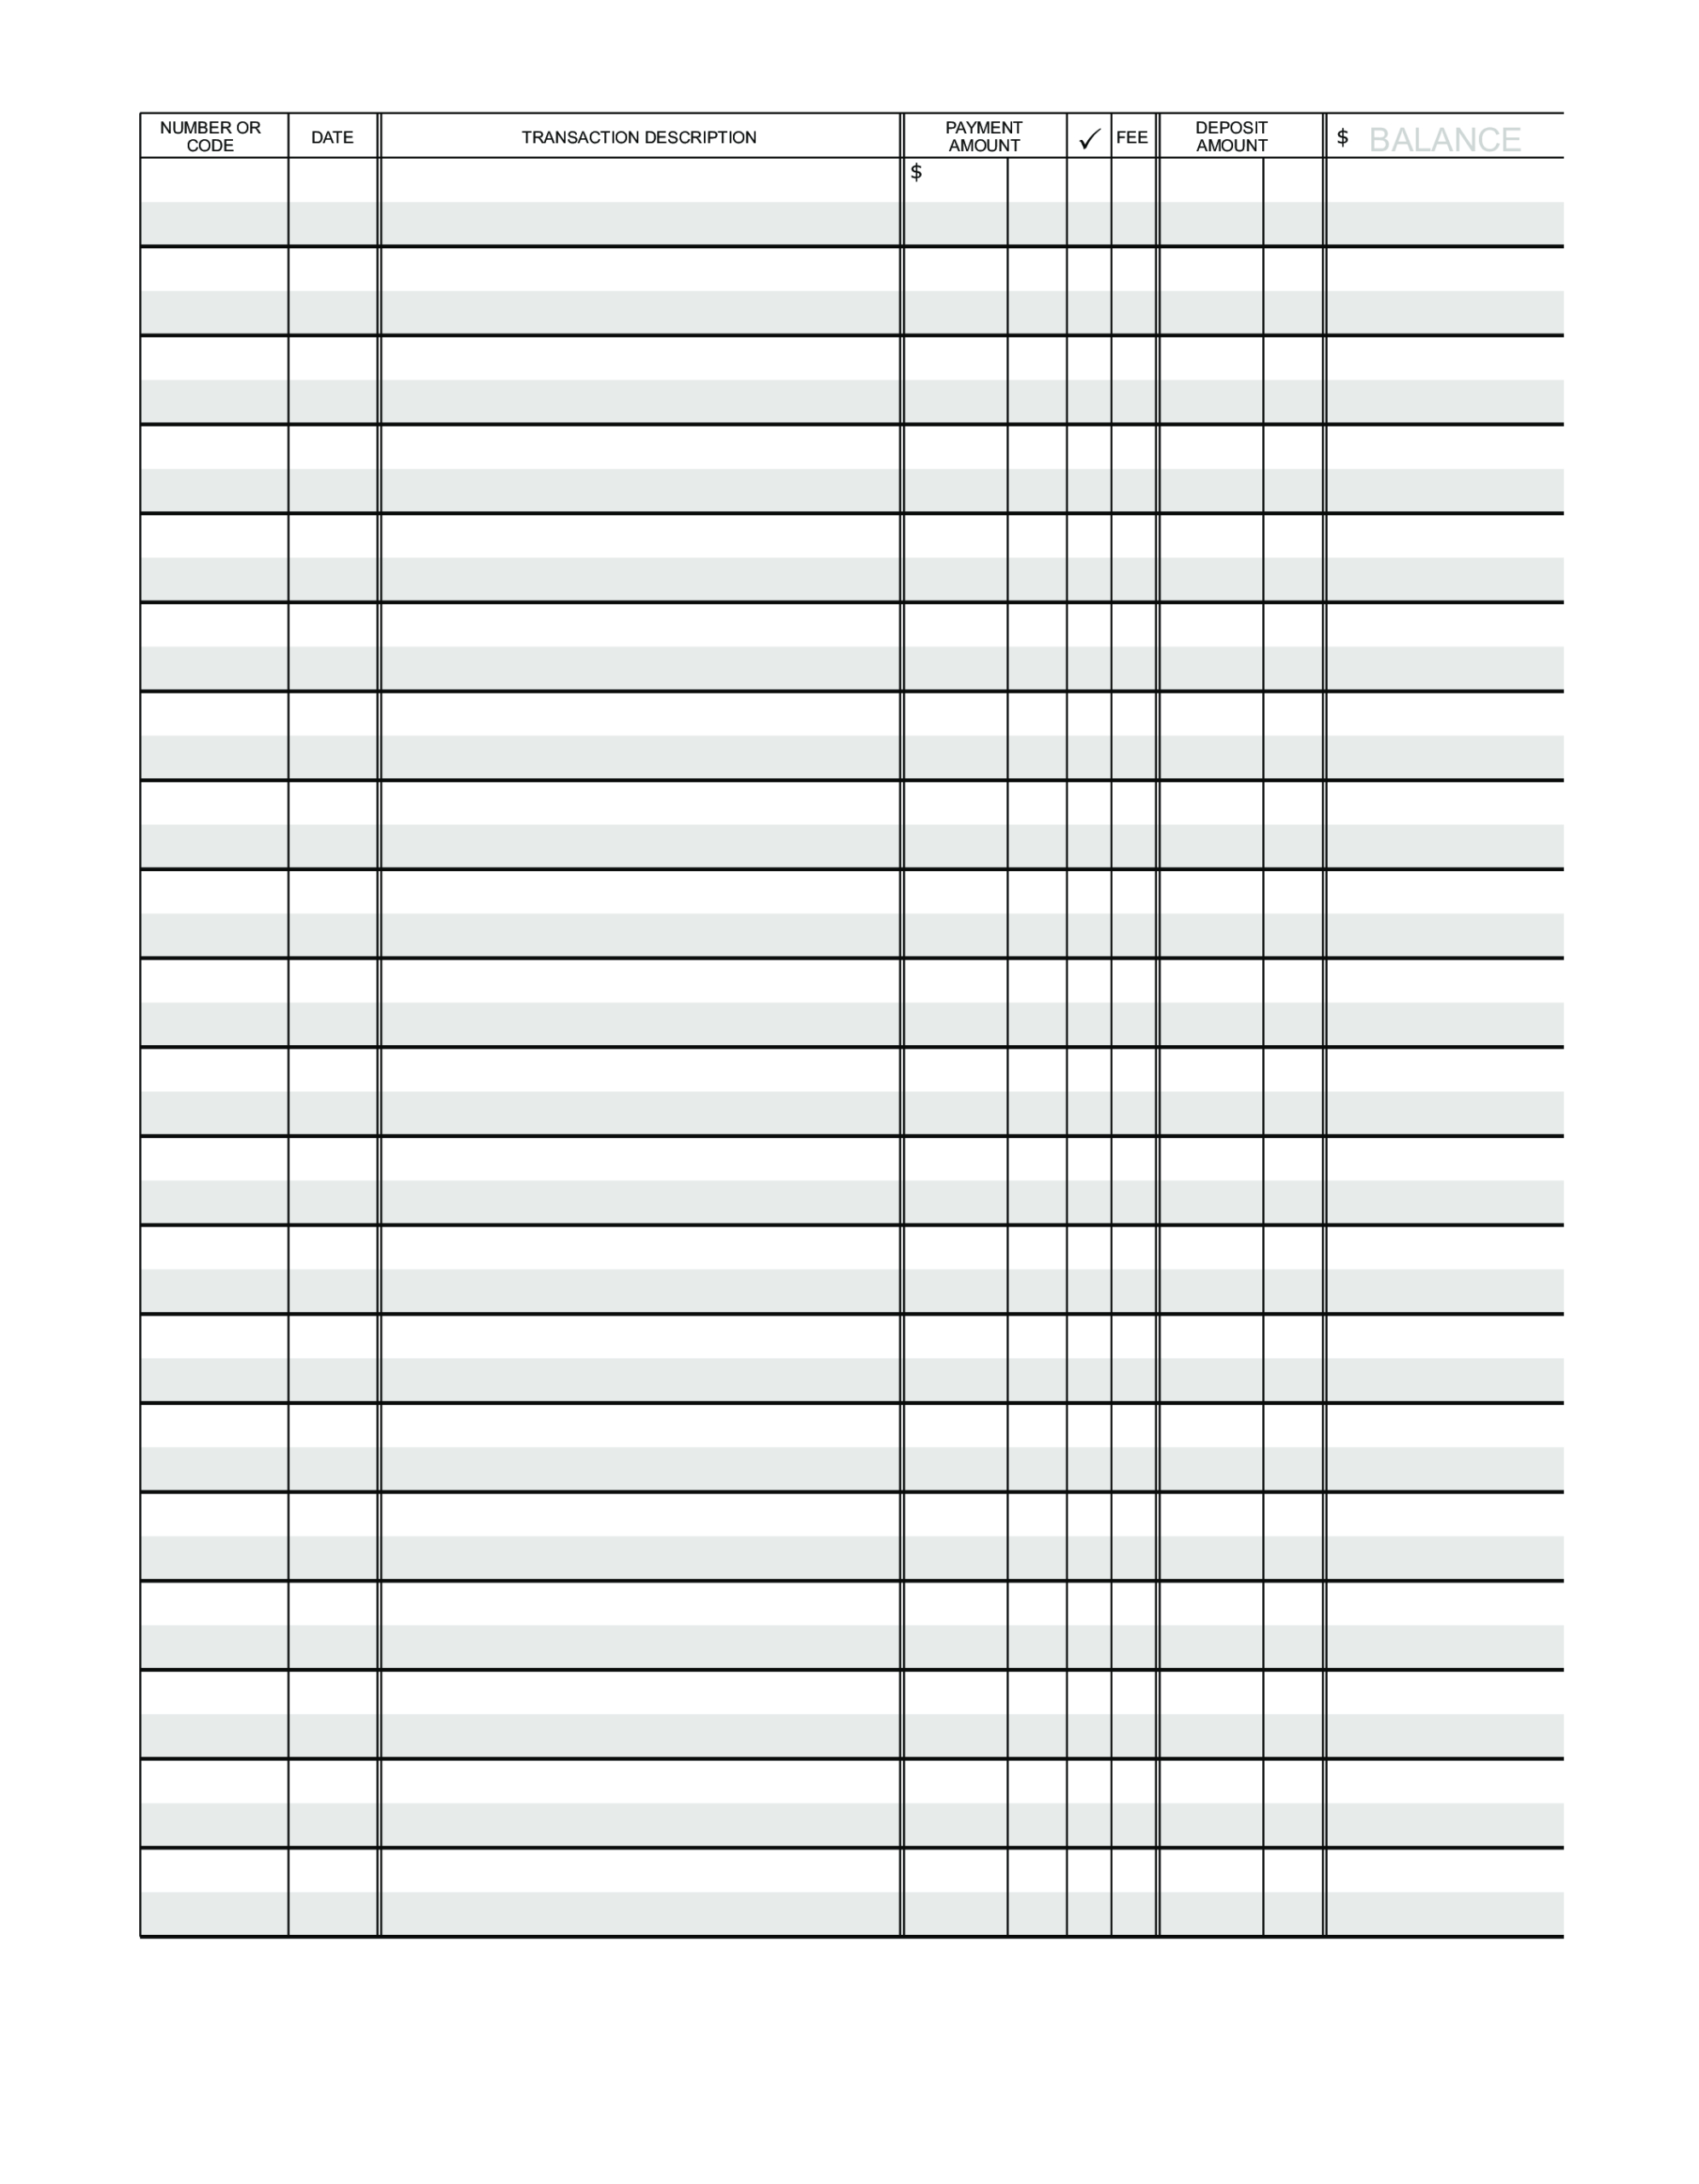 Blank Ledger Paper | Templates At Allbusinesstemplates Within Blank Ledger Template